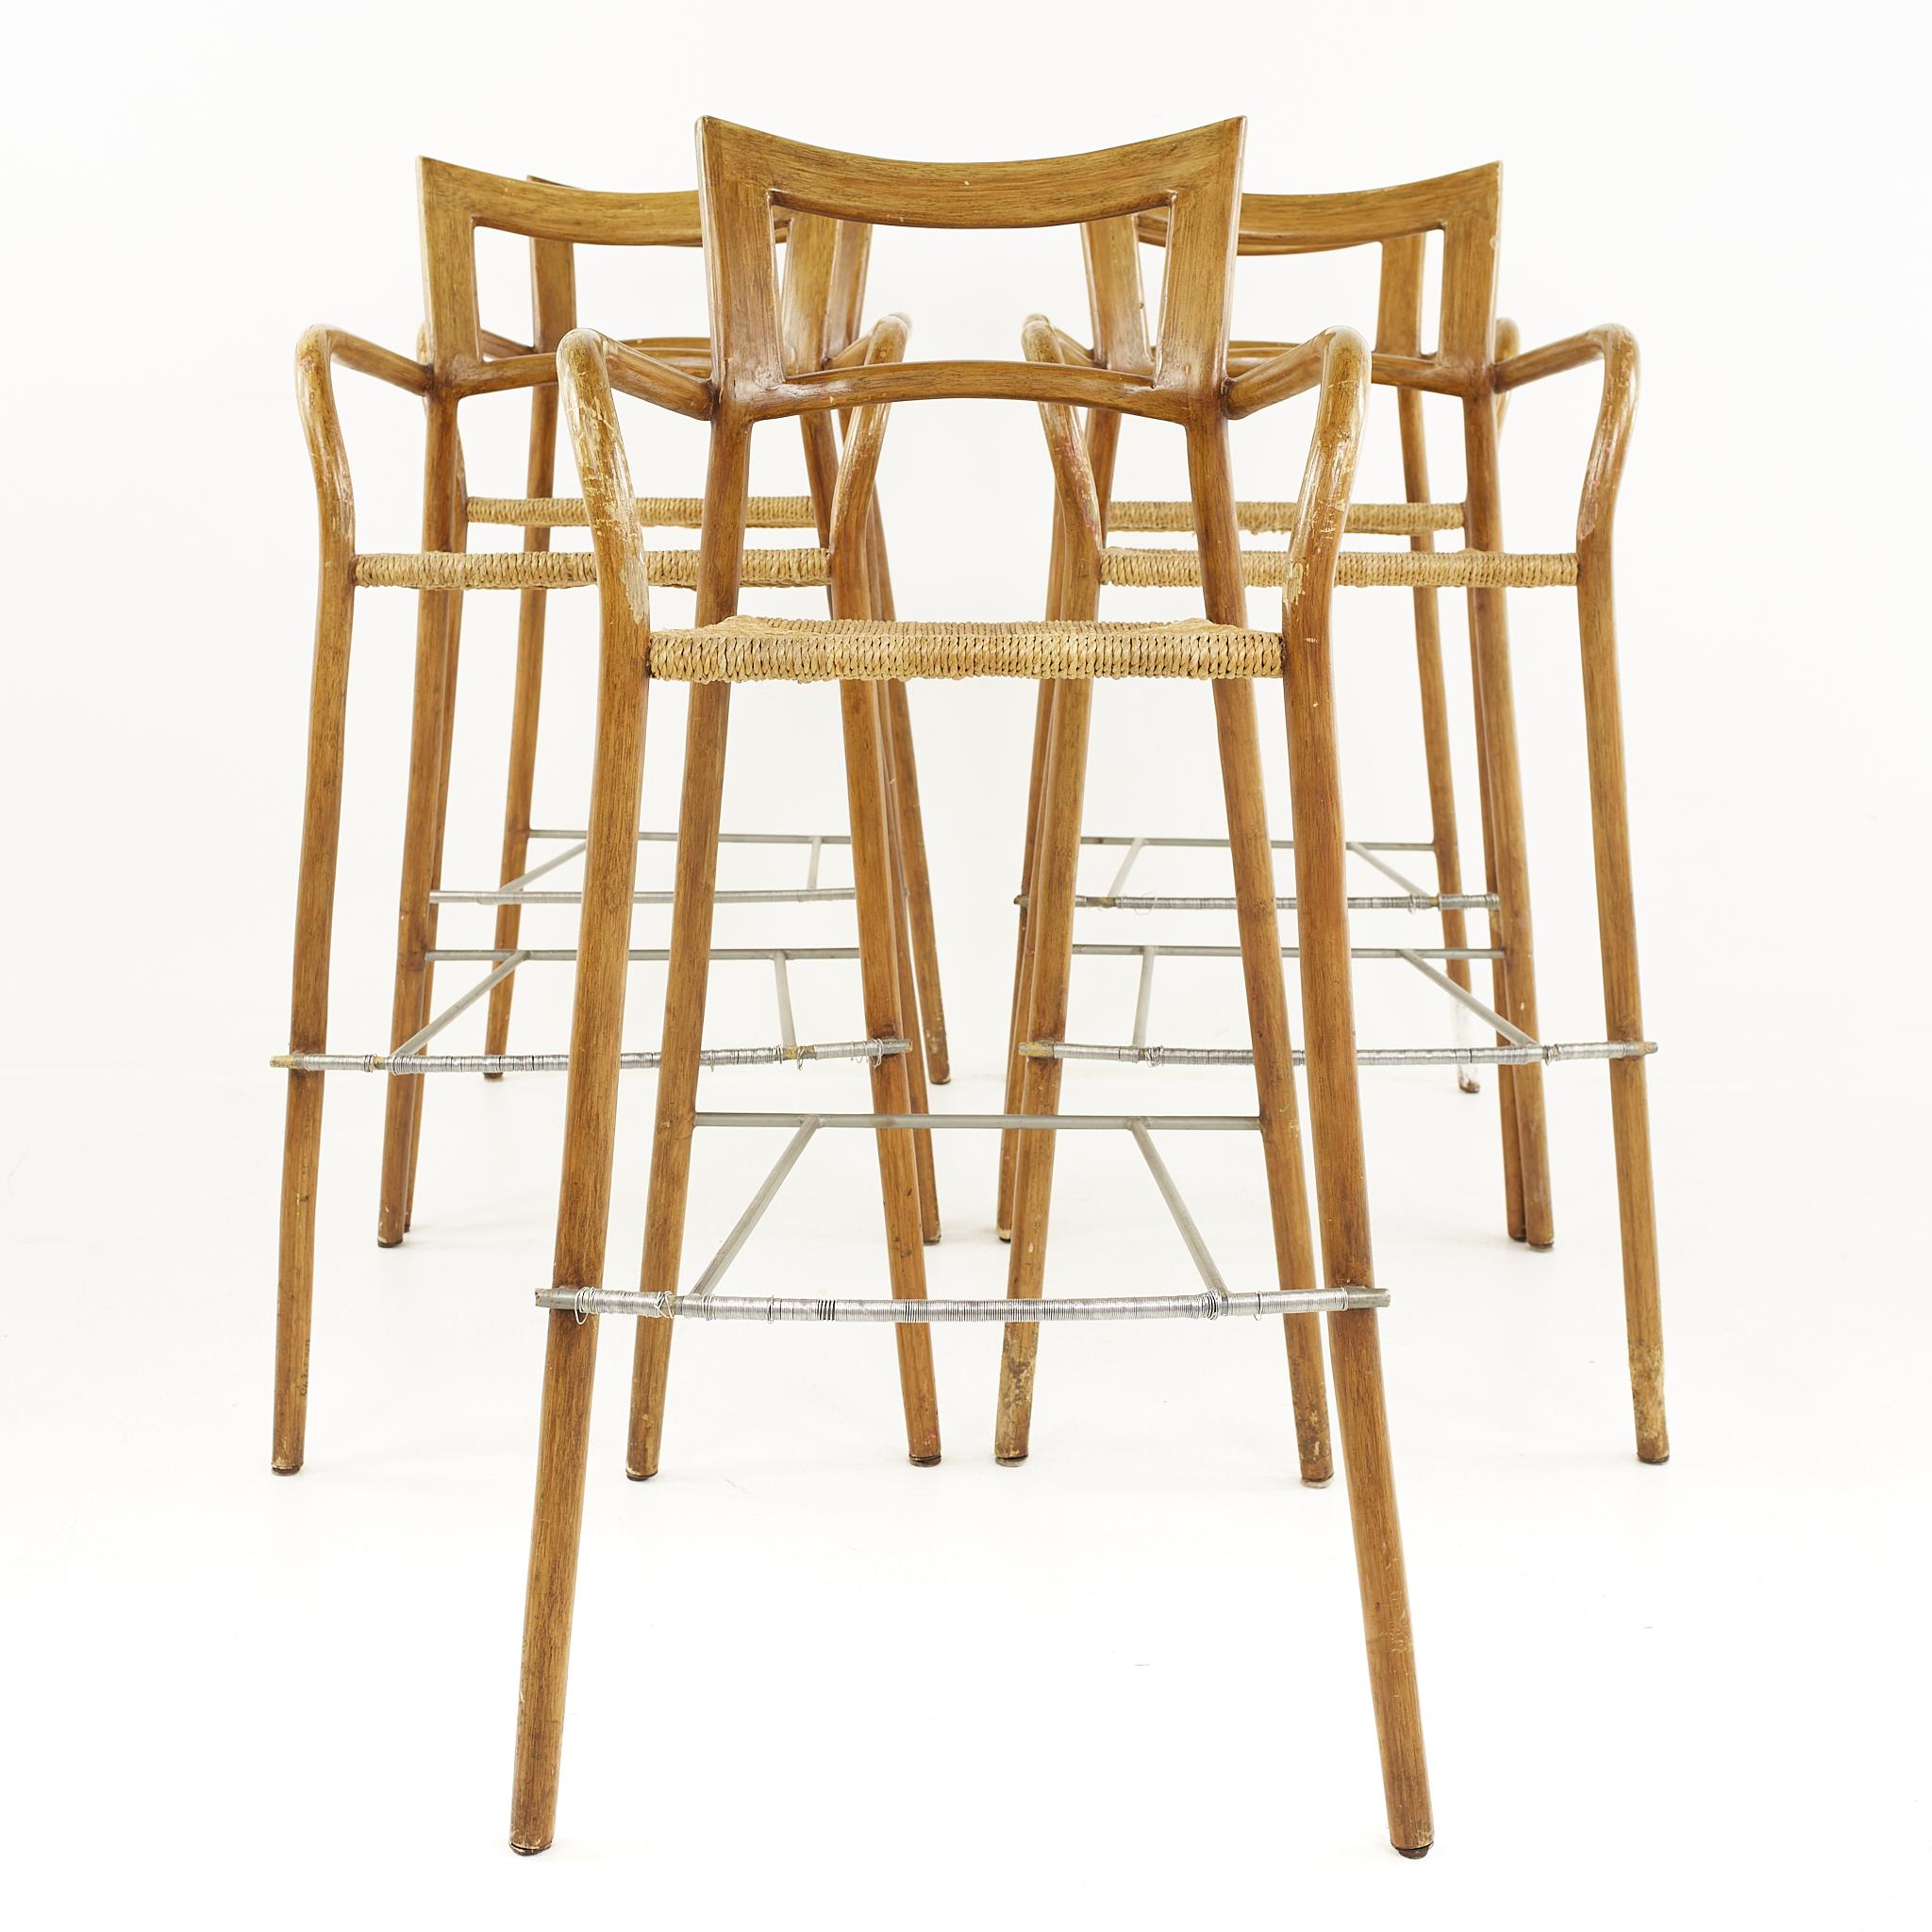 Mid-century rope seat bar stools - set of 5

Each stool measures: 21 wide x 26 deep x 44.25 high, with a seat height of 30.5 inches and arm height of 38 inches

All pieces of furniture can be had in what we call restored vintage condition. That